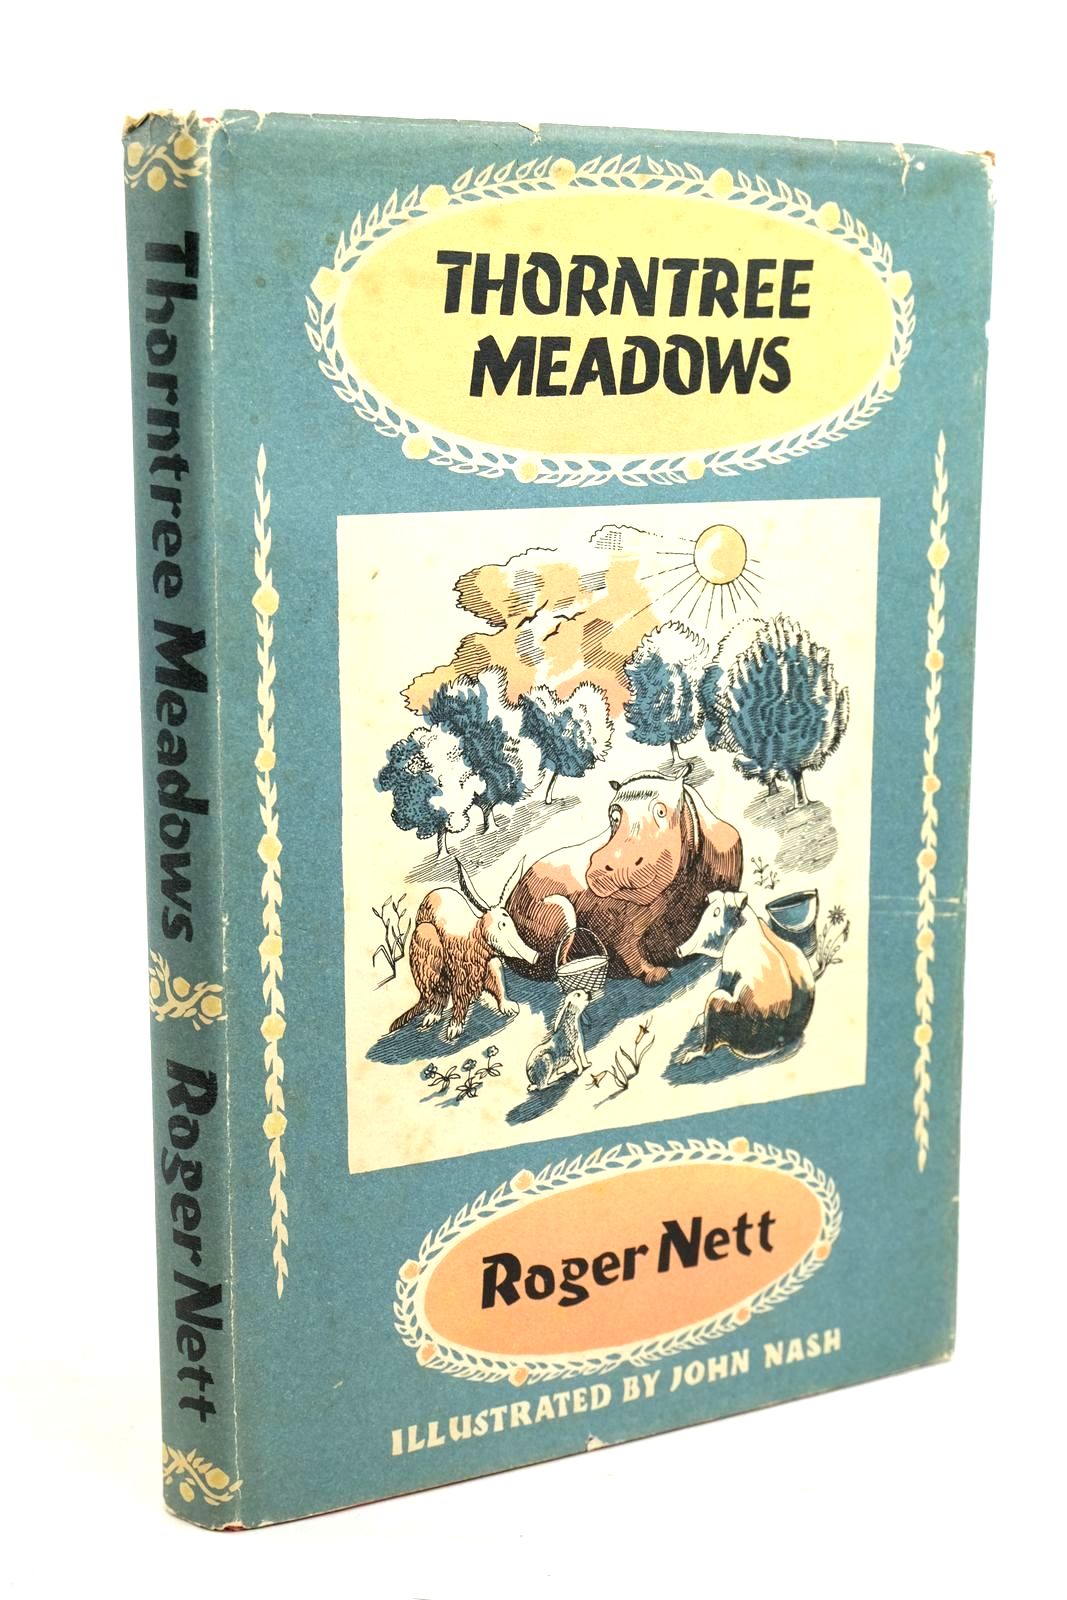 Photo of THORNTREE MEADOWS written by Nett, Roger illustrated by Nash, John published by Thomas Nelson and Sons Ltd. (STOCK CODE: 1320445)  for sale by Stella & Rose's Books